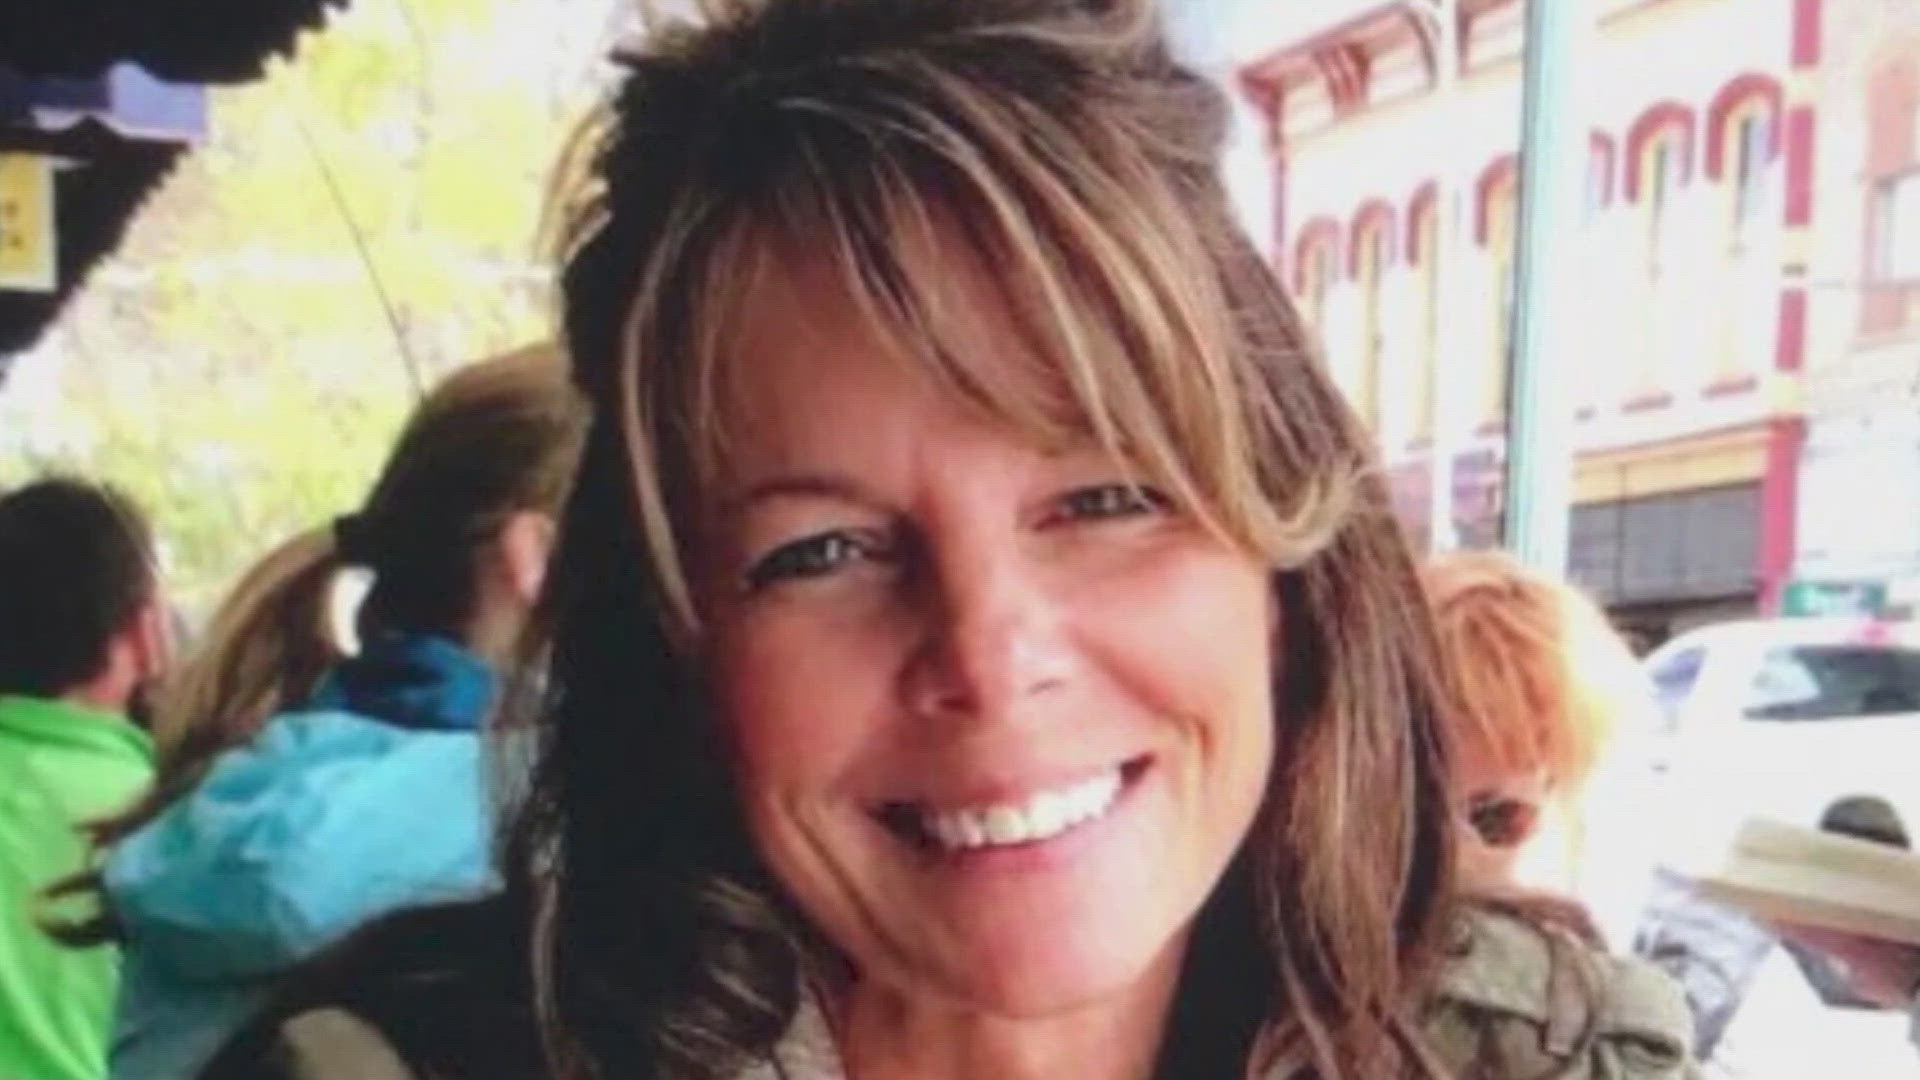 Suzanne Morphew, 49, went missing on Mother's Day in May 2020. Authorities found her remains in Saguache County in October 2023.